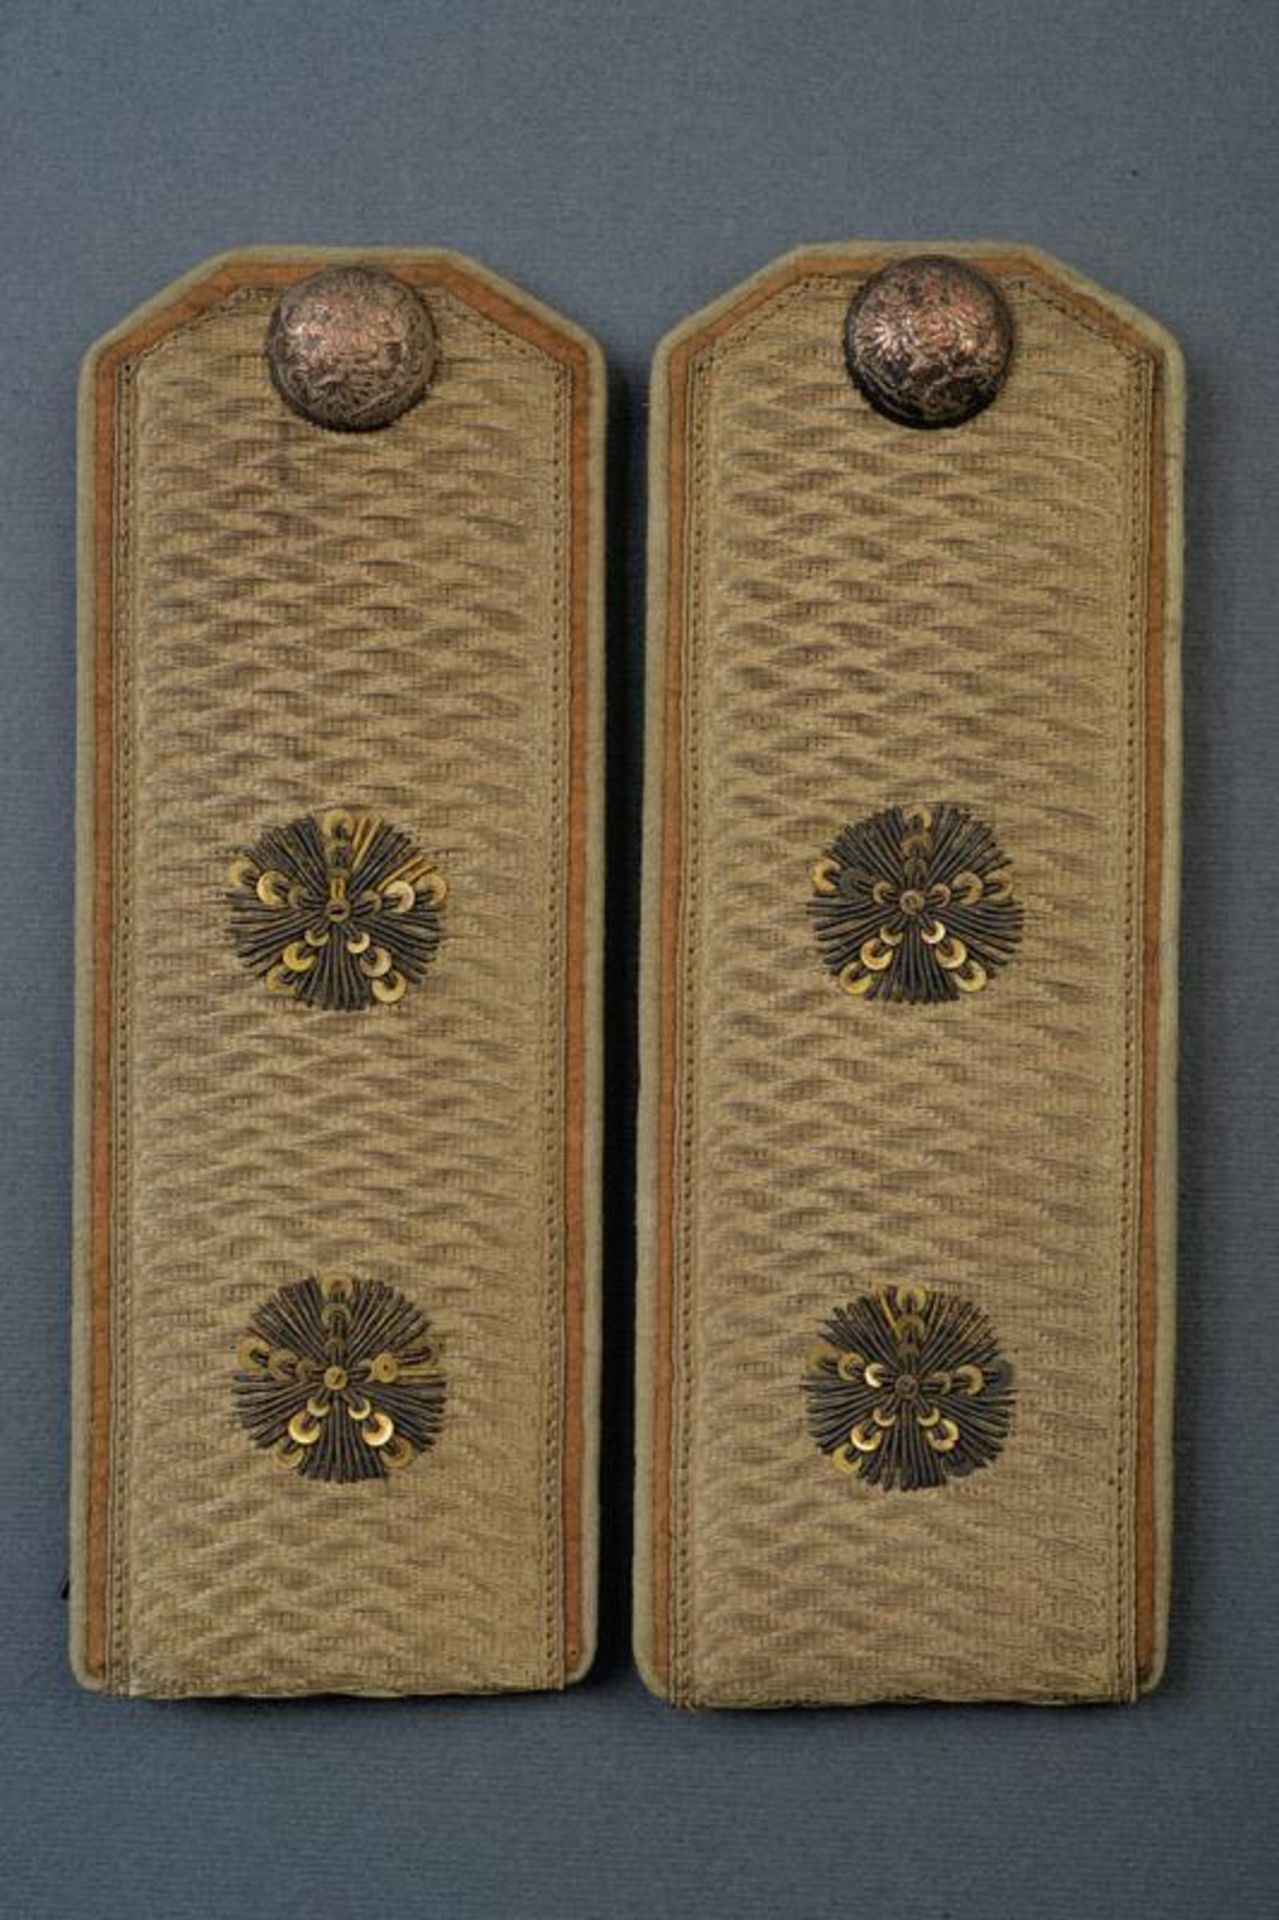 A pair of state councillor's shoulder boards